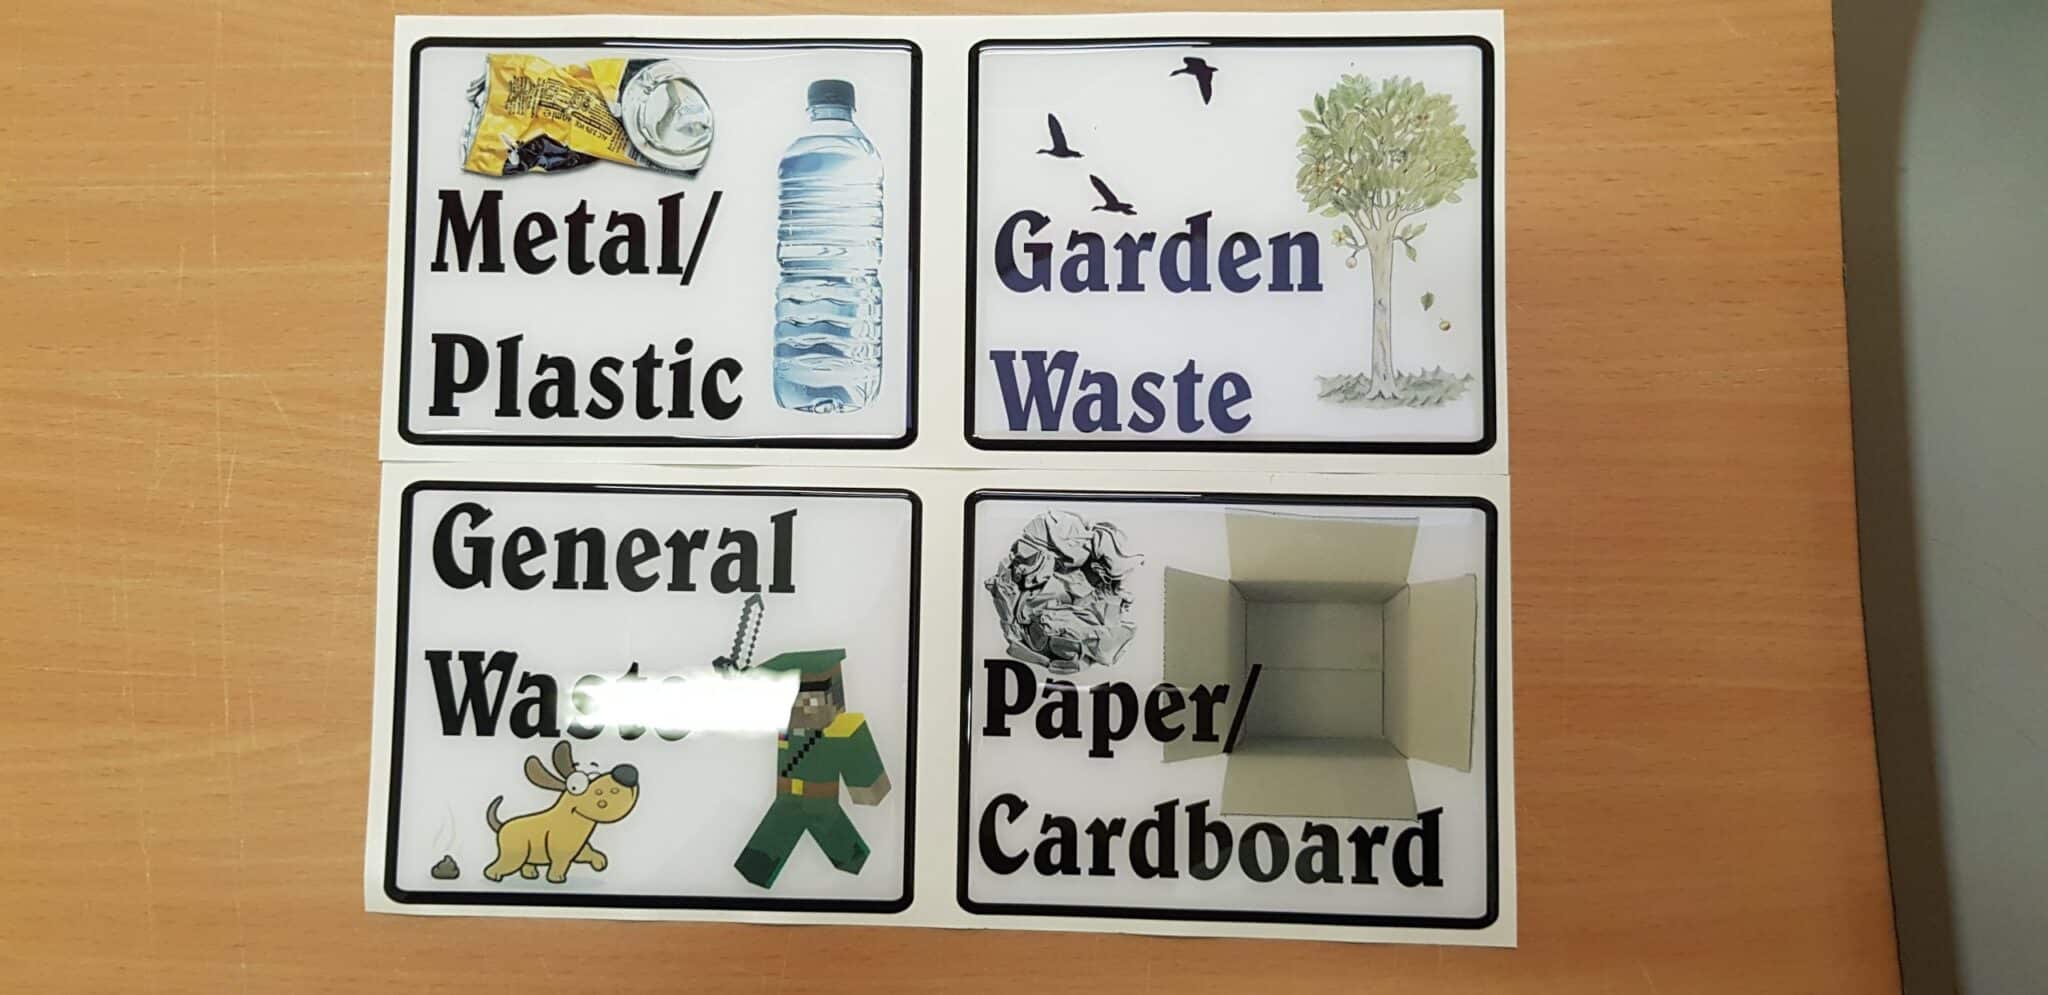 Recycling vinyl stickers